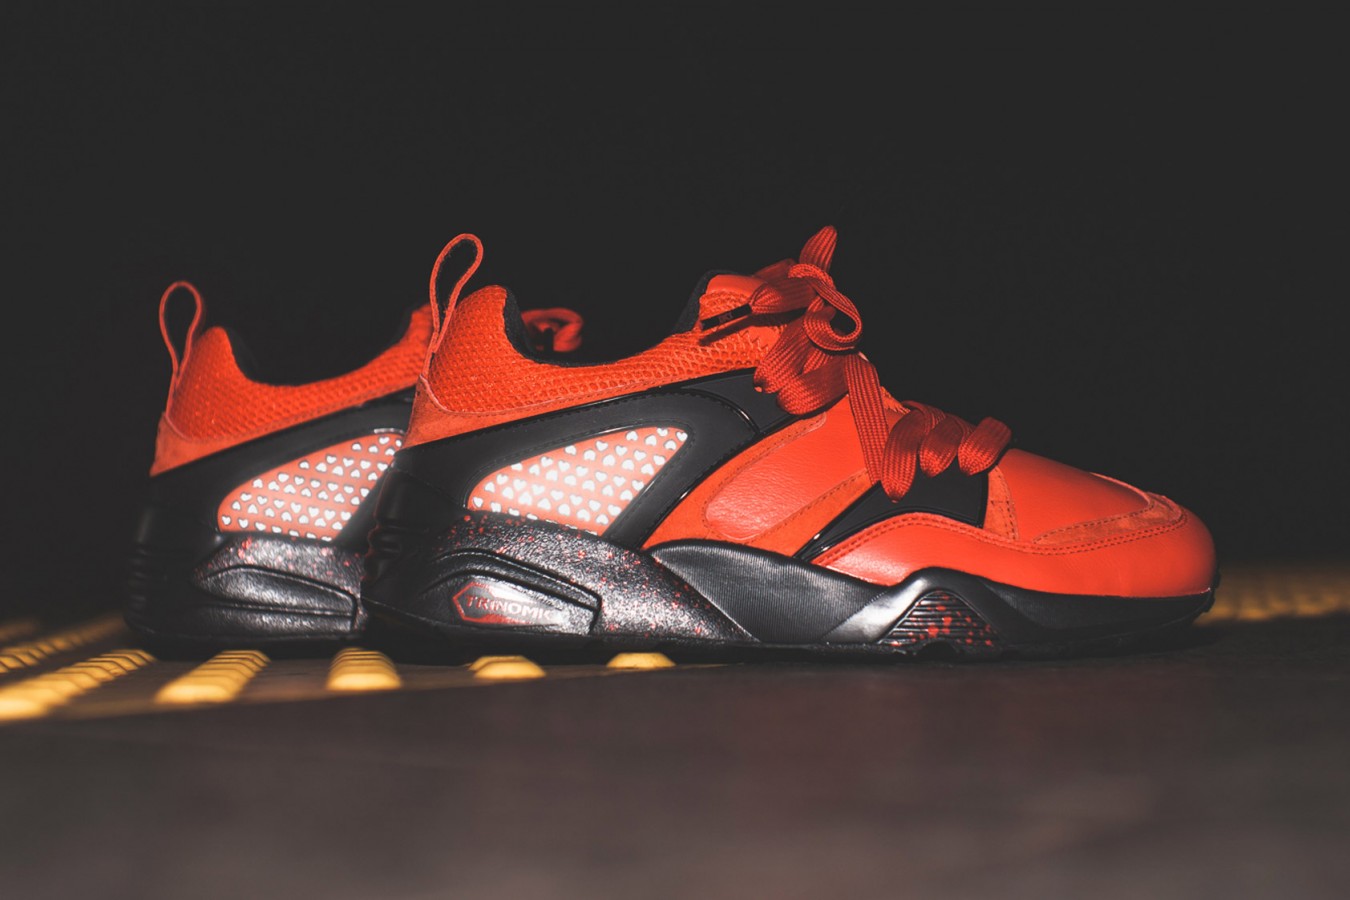 rise-puma-blaze-of-glory-new-york-is-for-lovers-07-1350x900